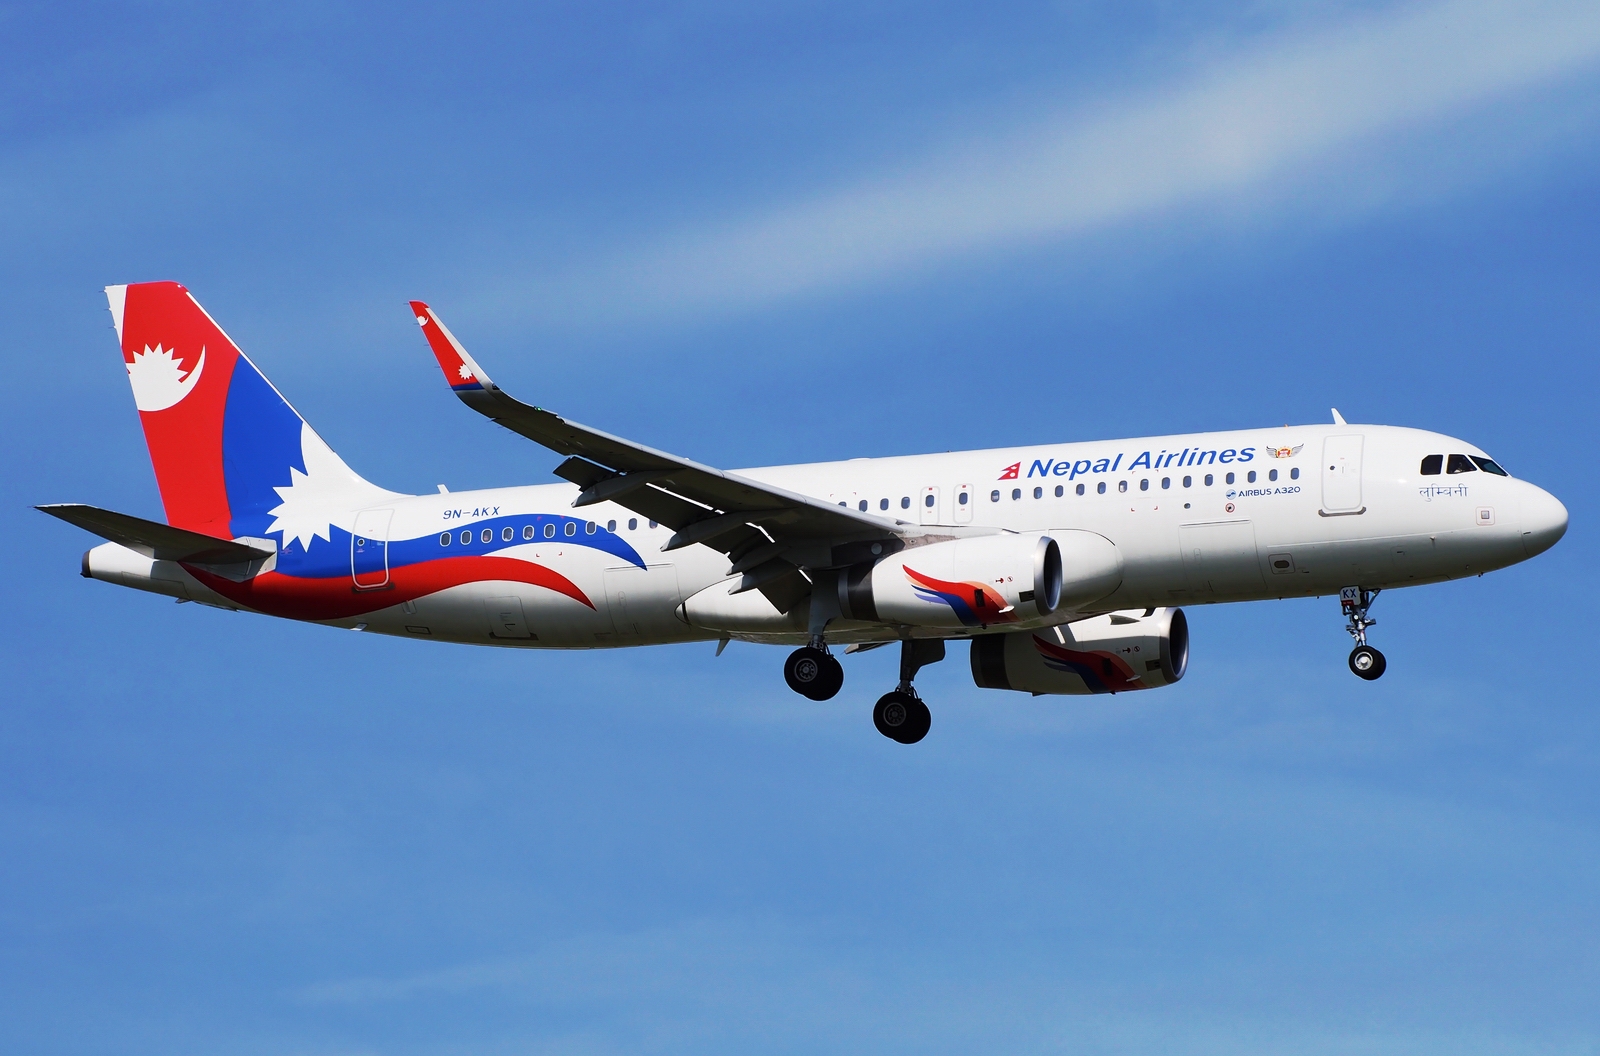 Nepal Airlines conducting direct flight to Saudi Arabia from April 22